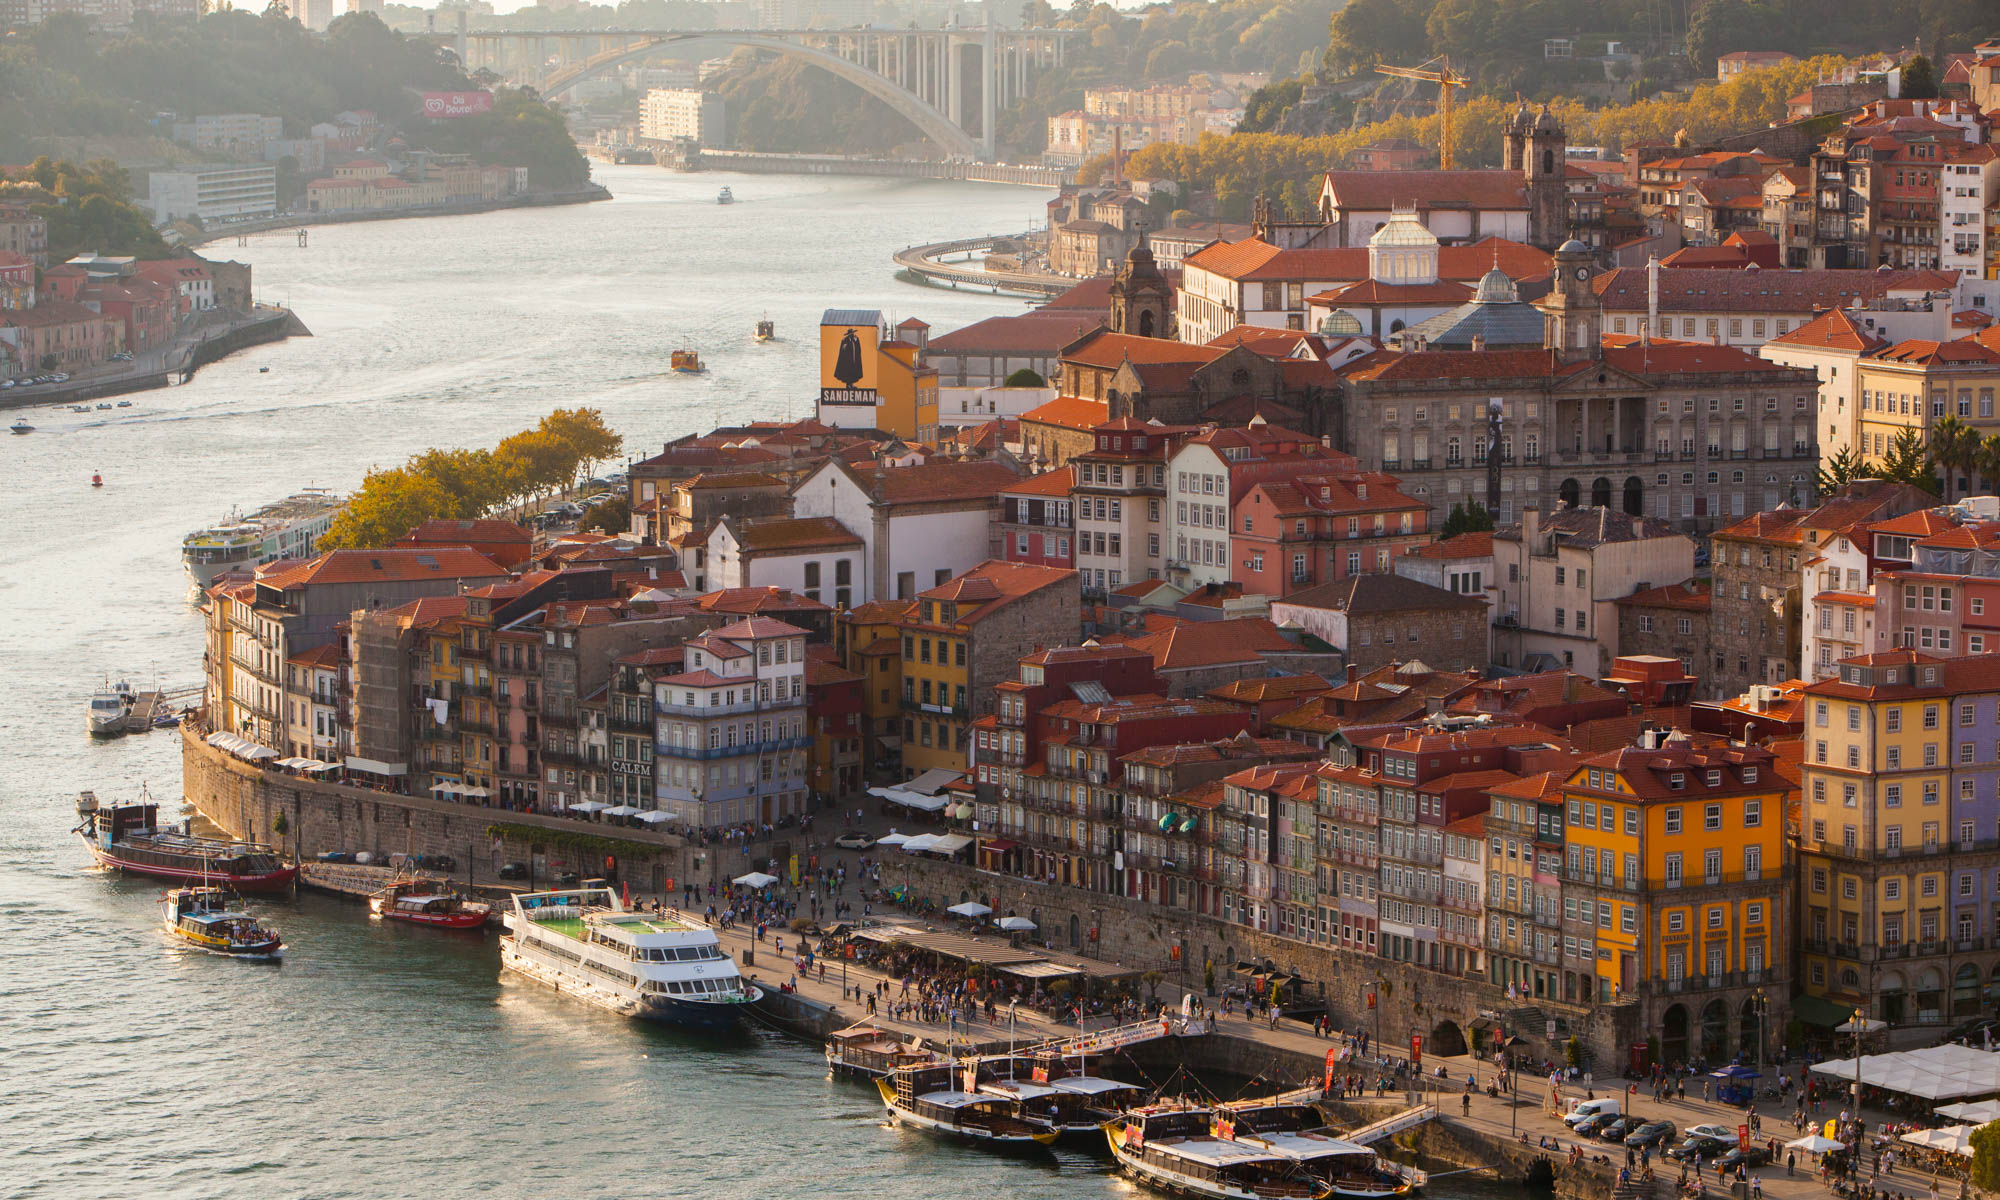 View of the Douro River and historic district of Porto, Portugal with boats along the river